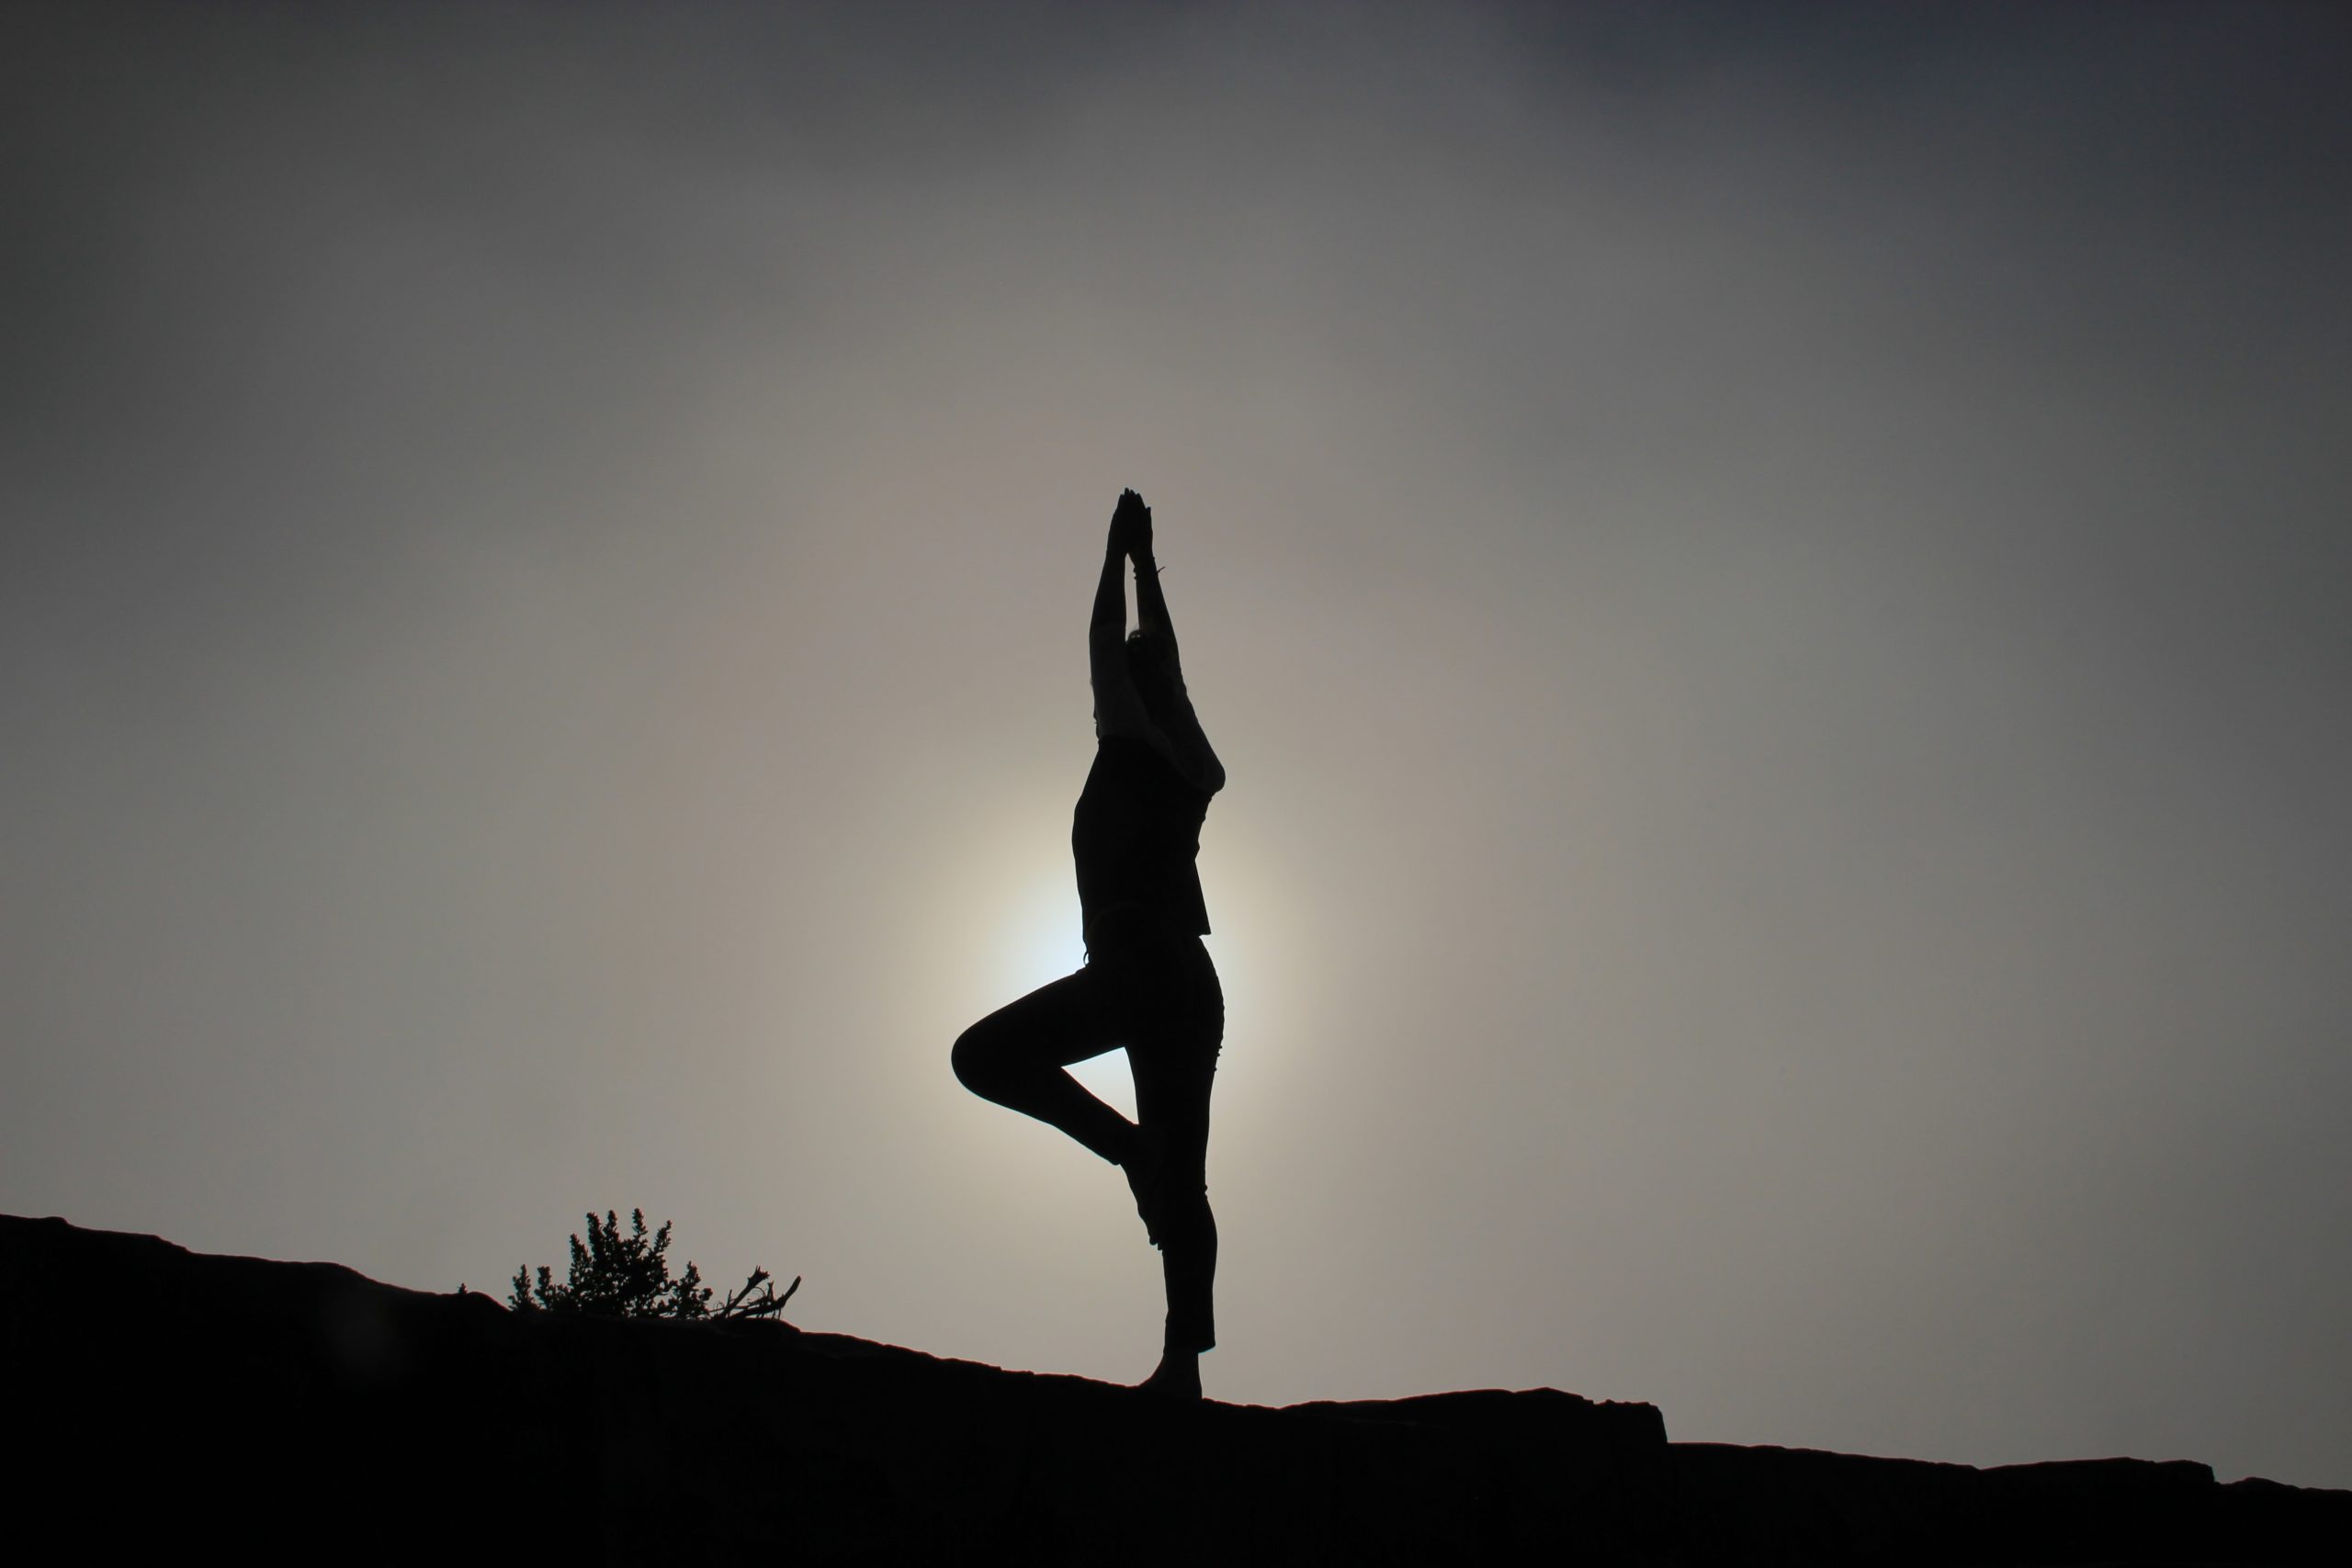 Silhouette of a person in a yoga tree pose